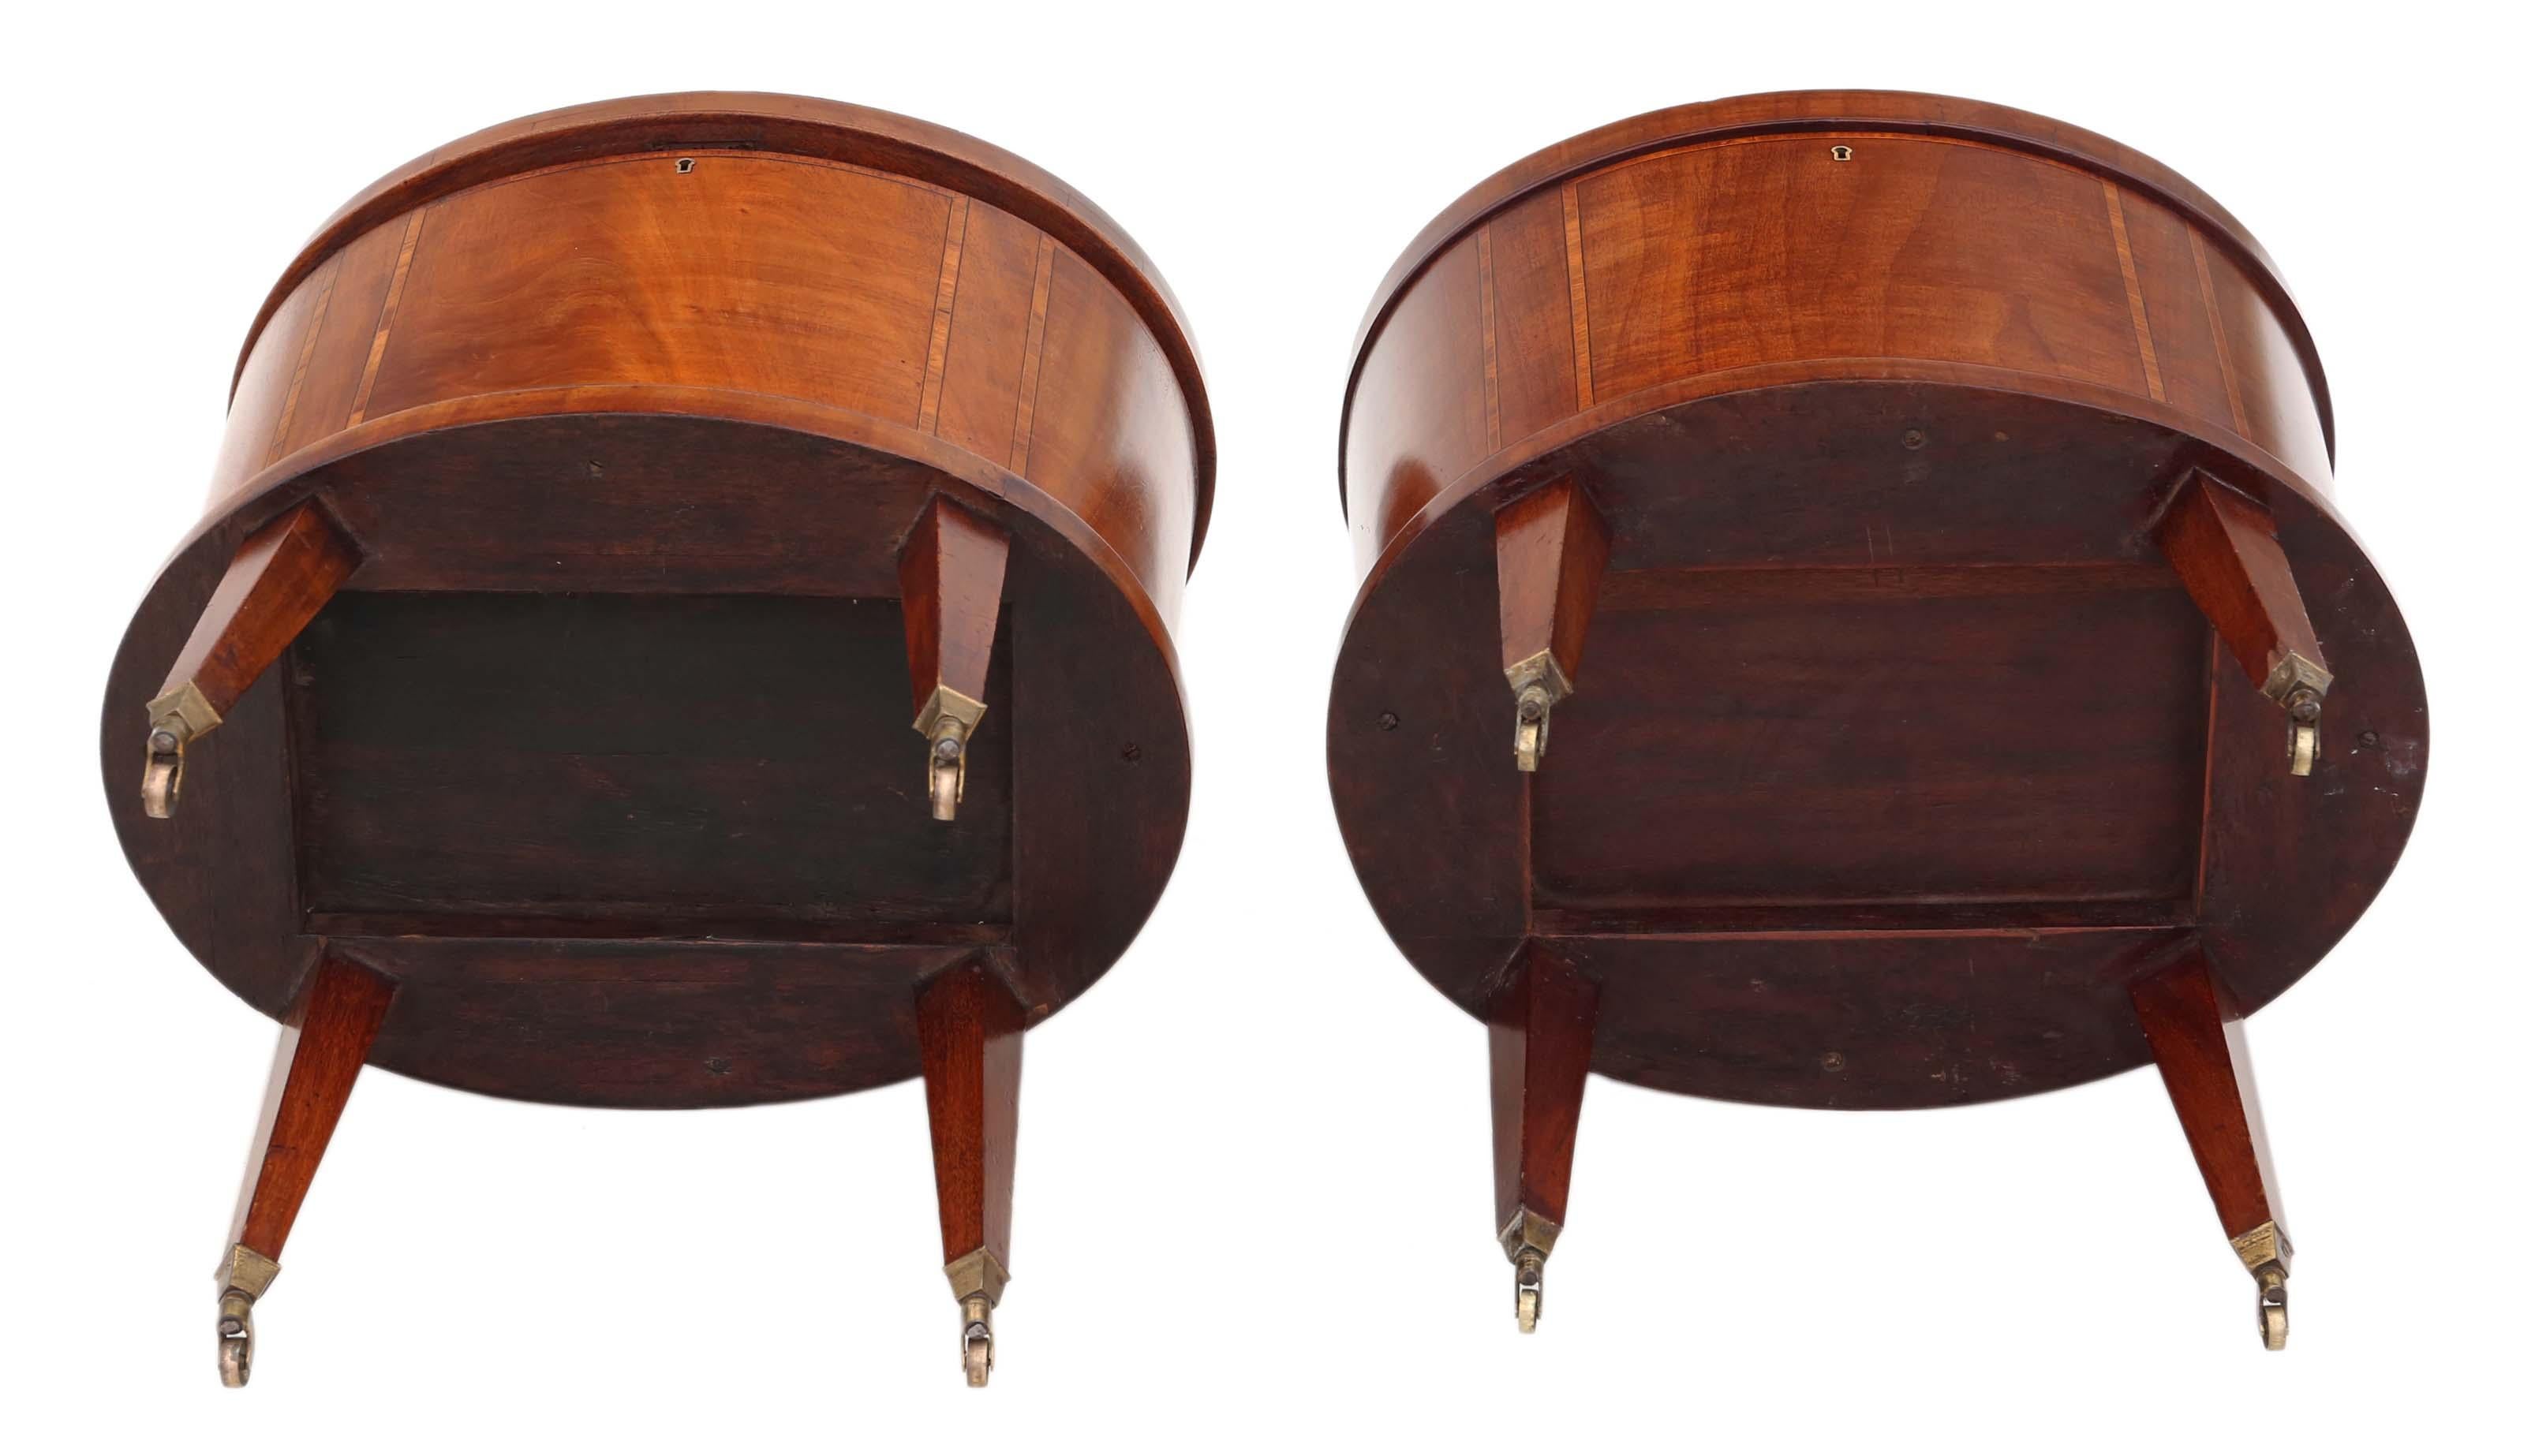 Antique Georgian Revival Pair of Inlaid Mahogany Cellarettes Cupboards Cabinets For Sale 3